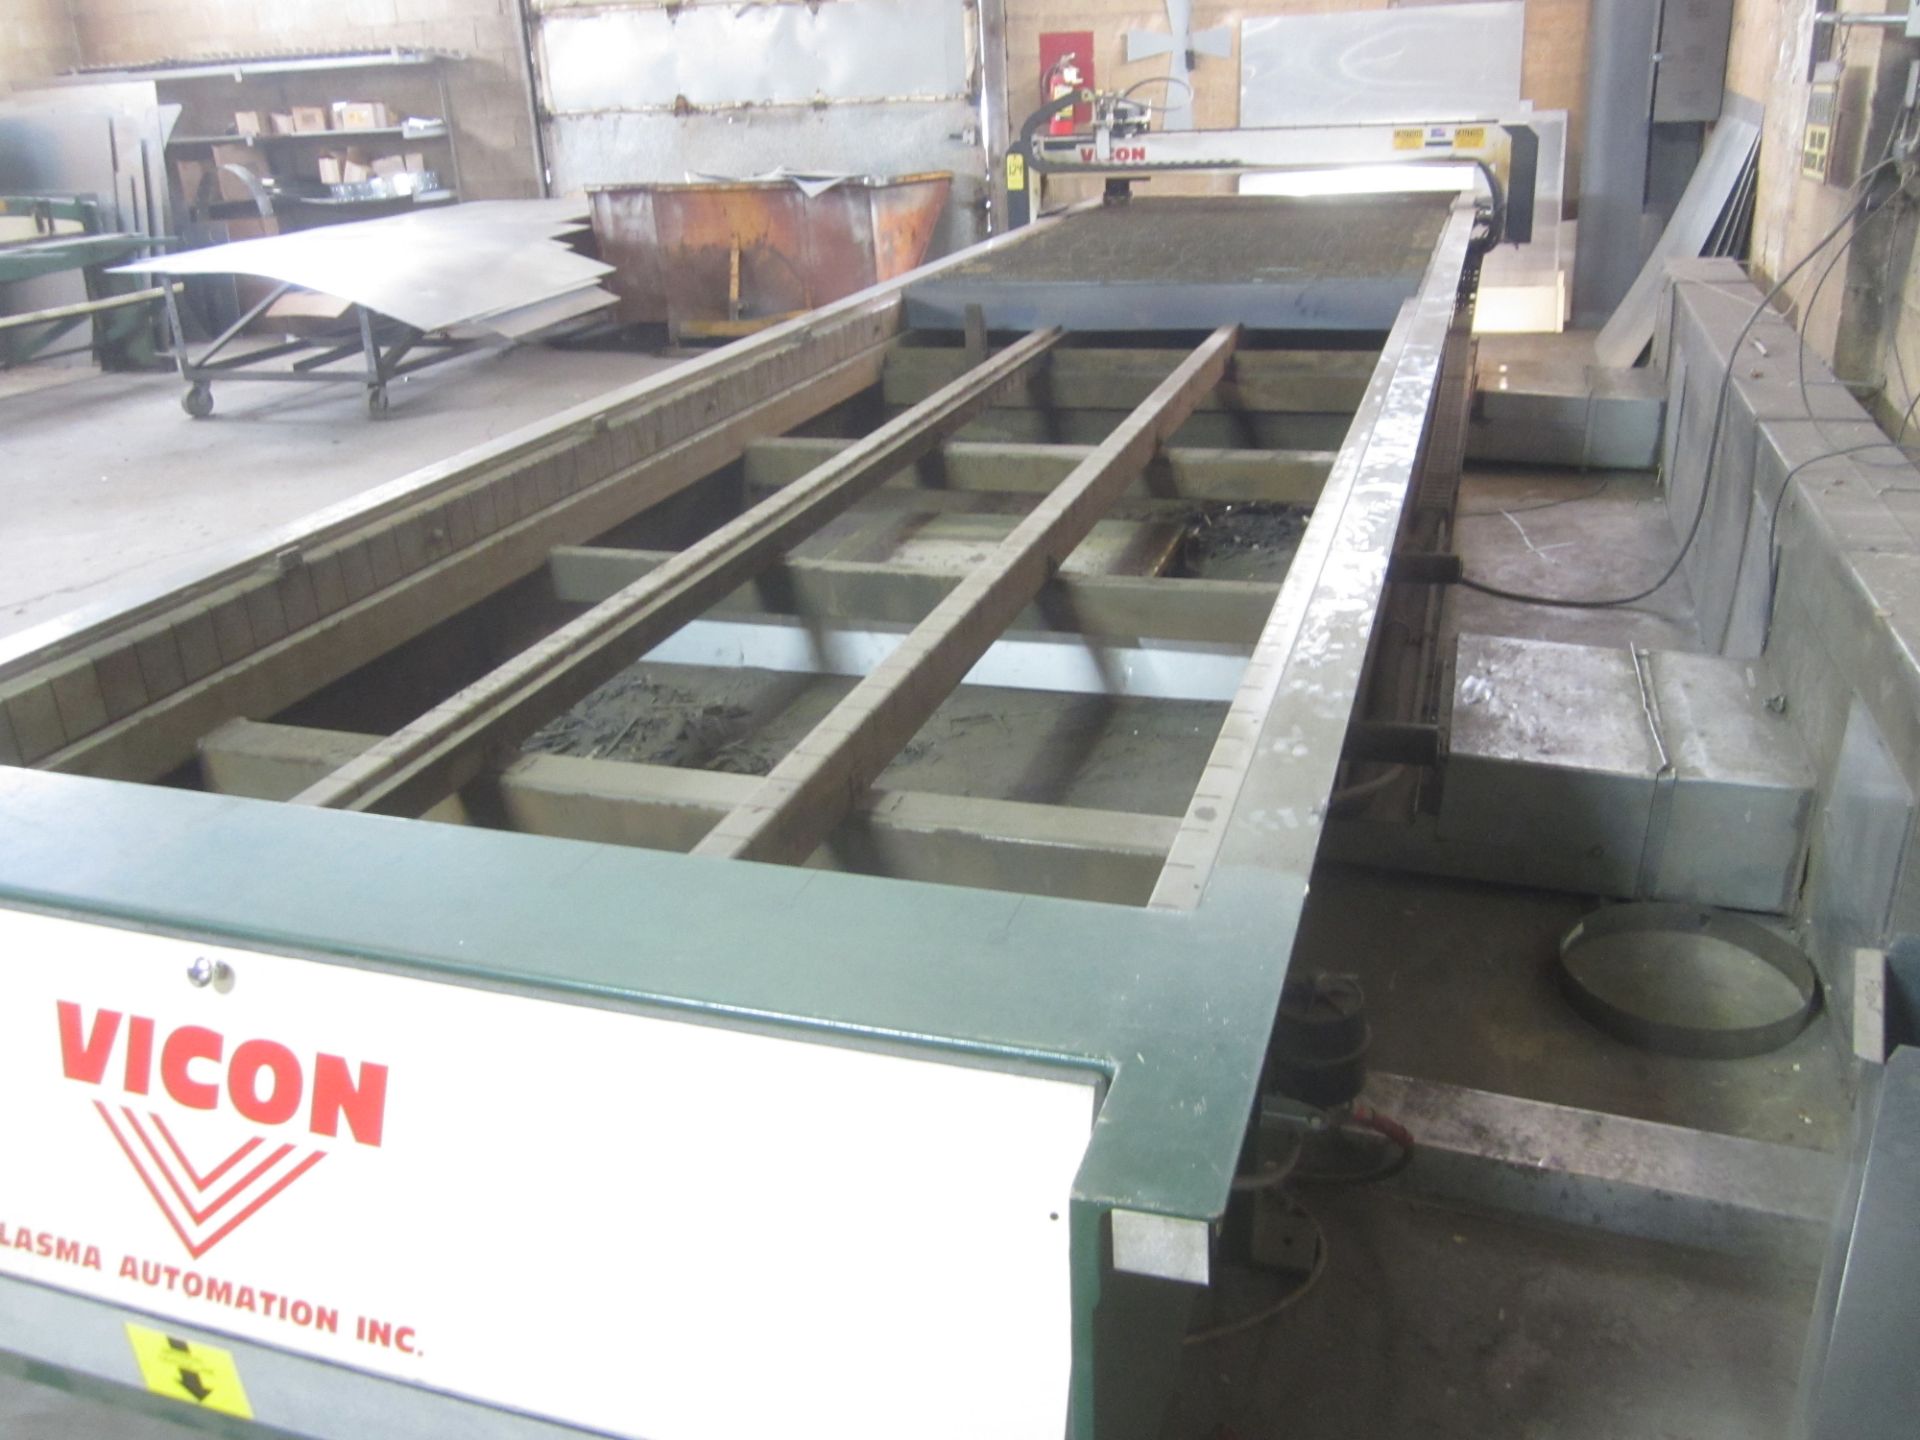 Vicon Model HVAC520 CNC Plasma System, s/n VM-2865, Equipped with Hypertherm Power Max 85 Plasma - Image 8 of 10